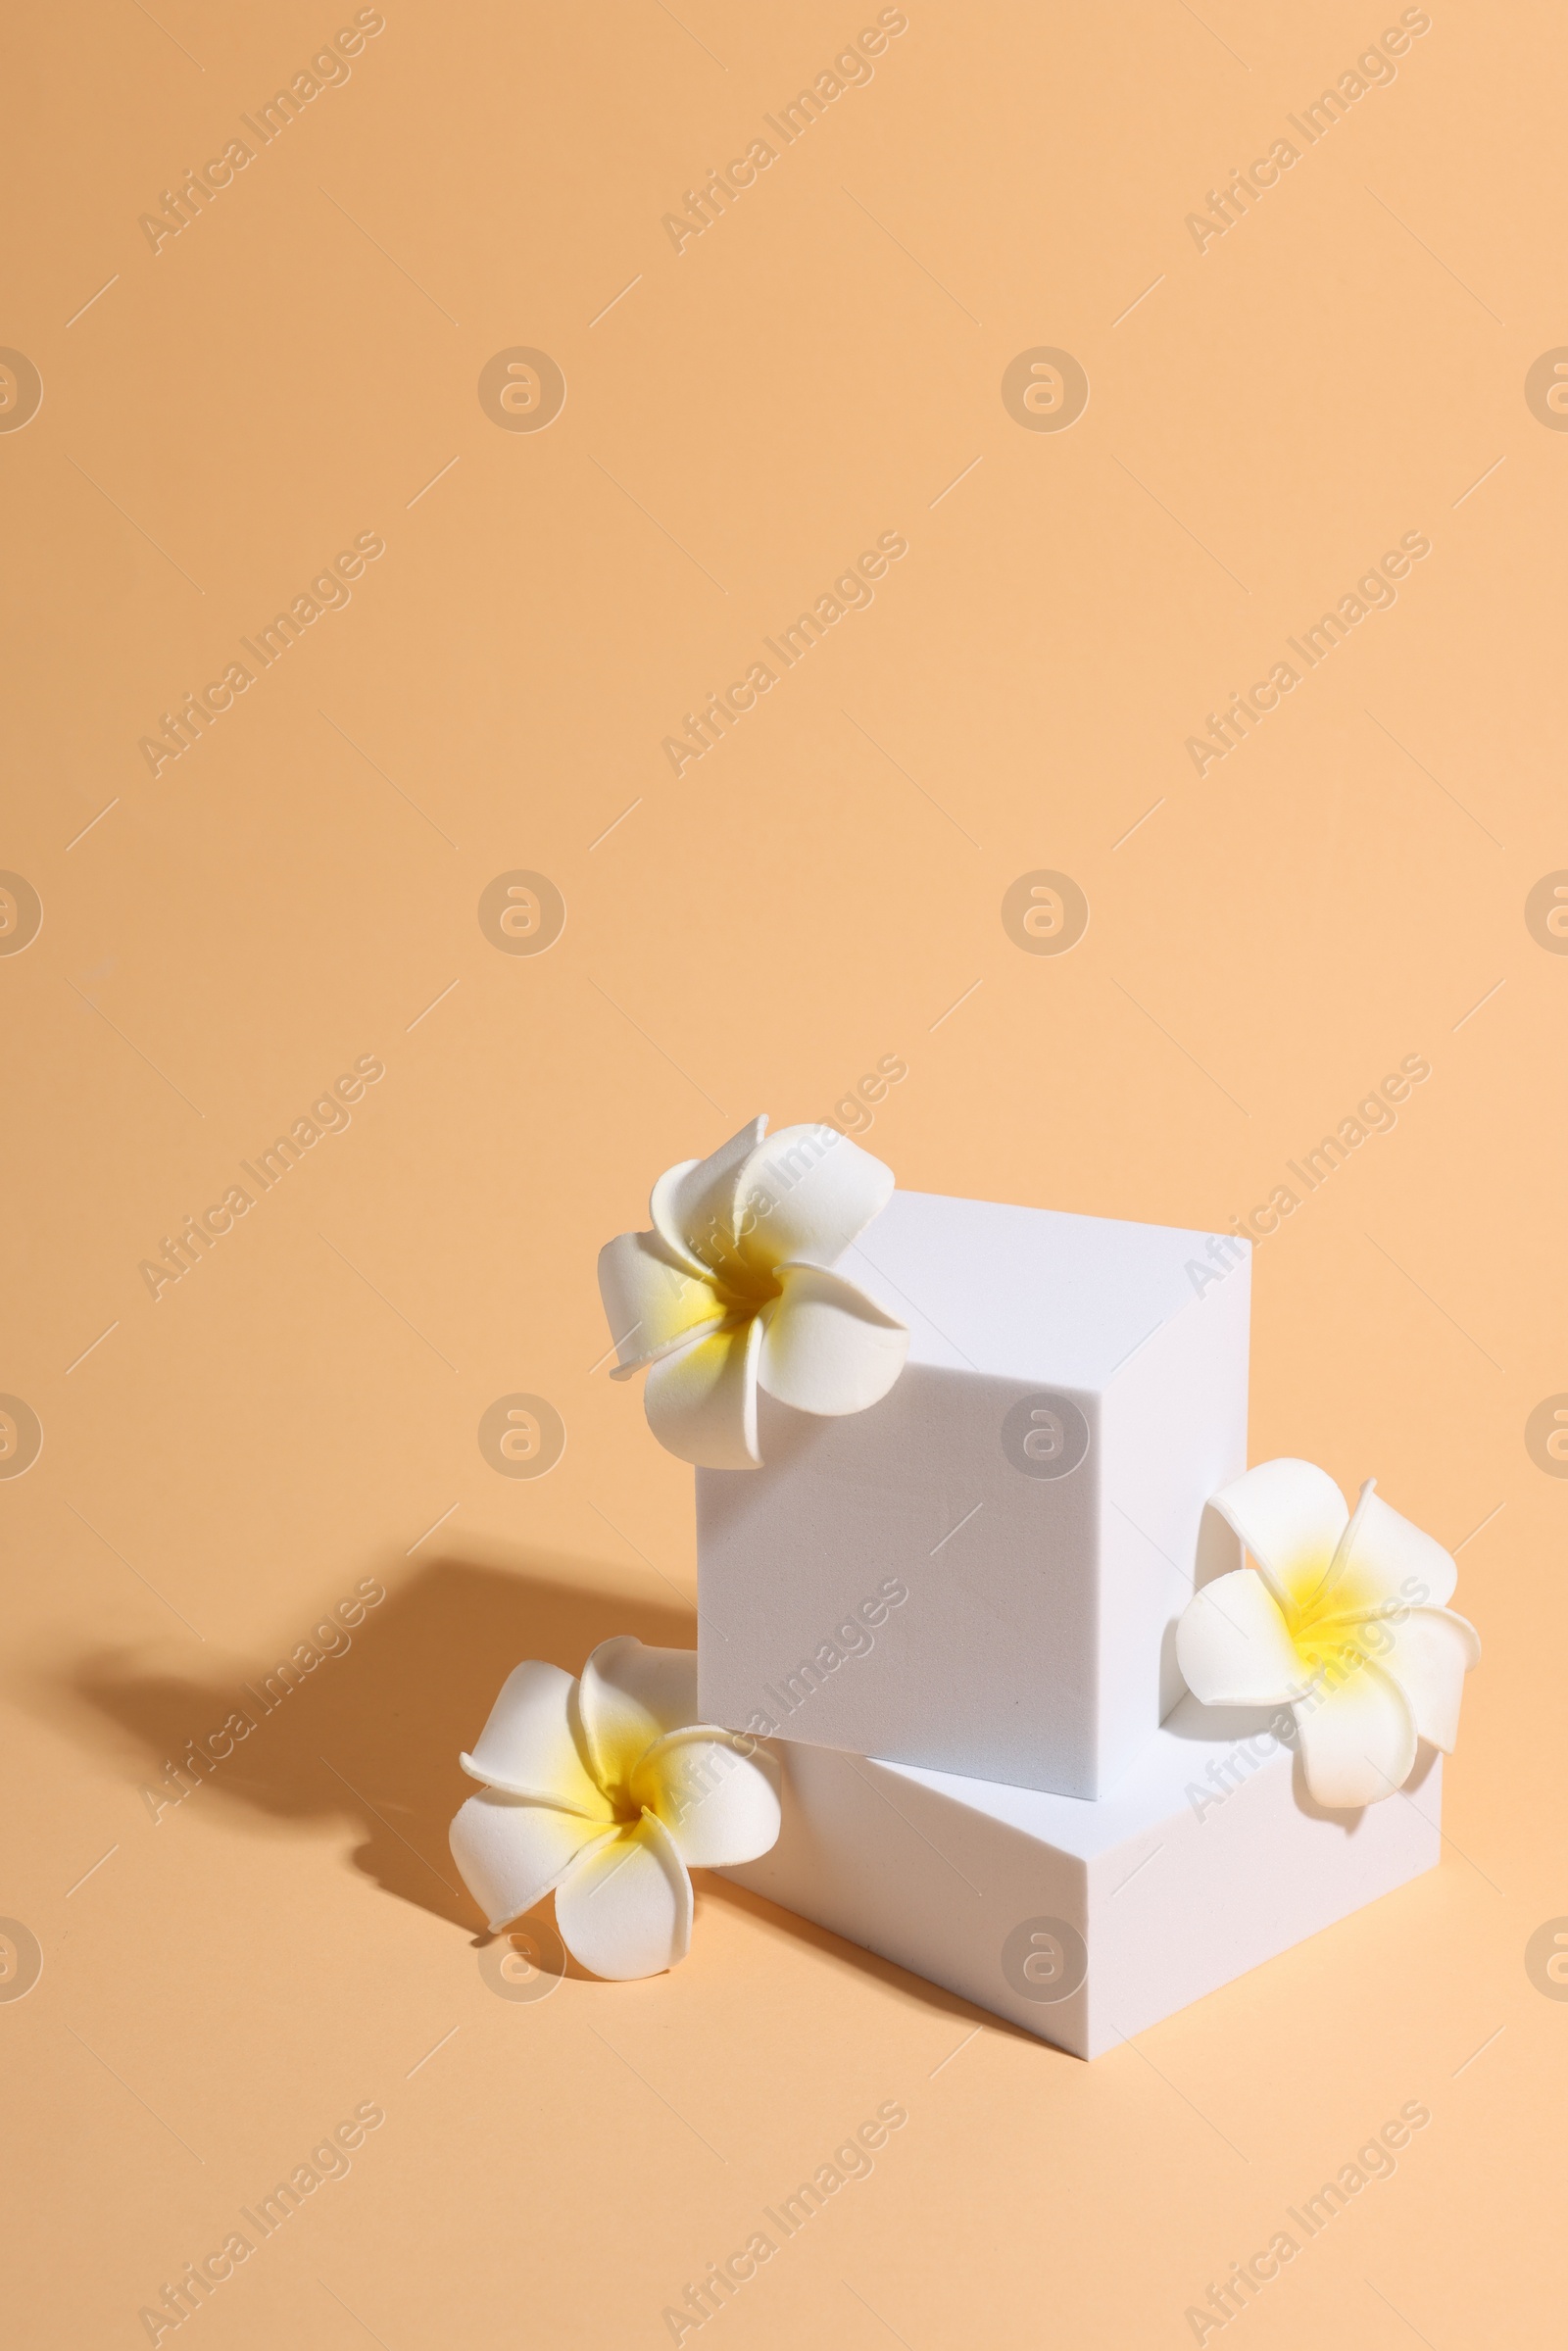 Photo of Scene with podium for product presentation. Figures of different geometric shapes and flowers on pale orange background